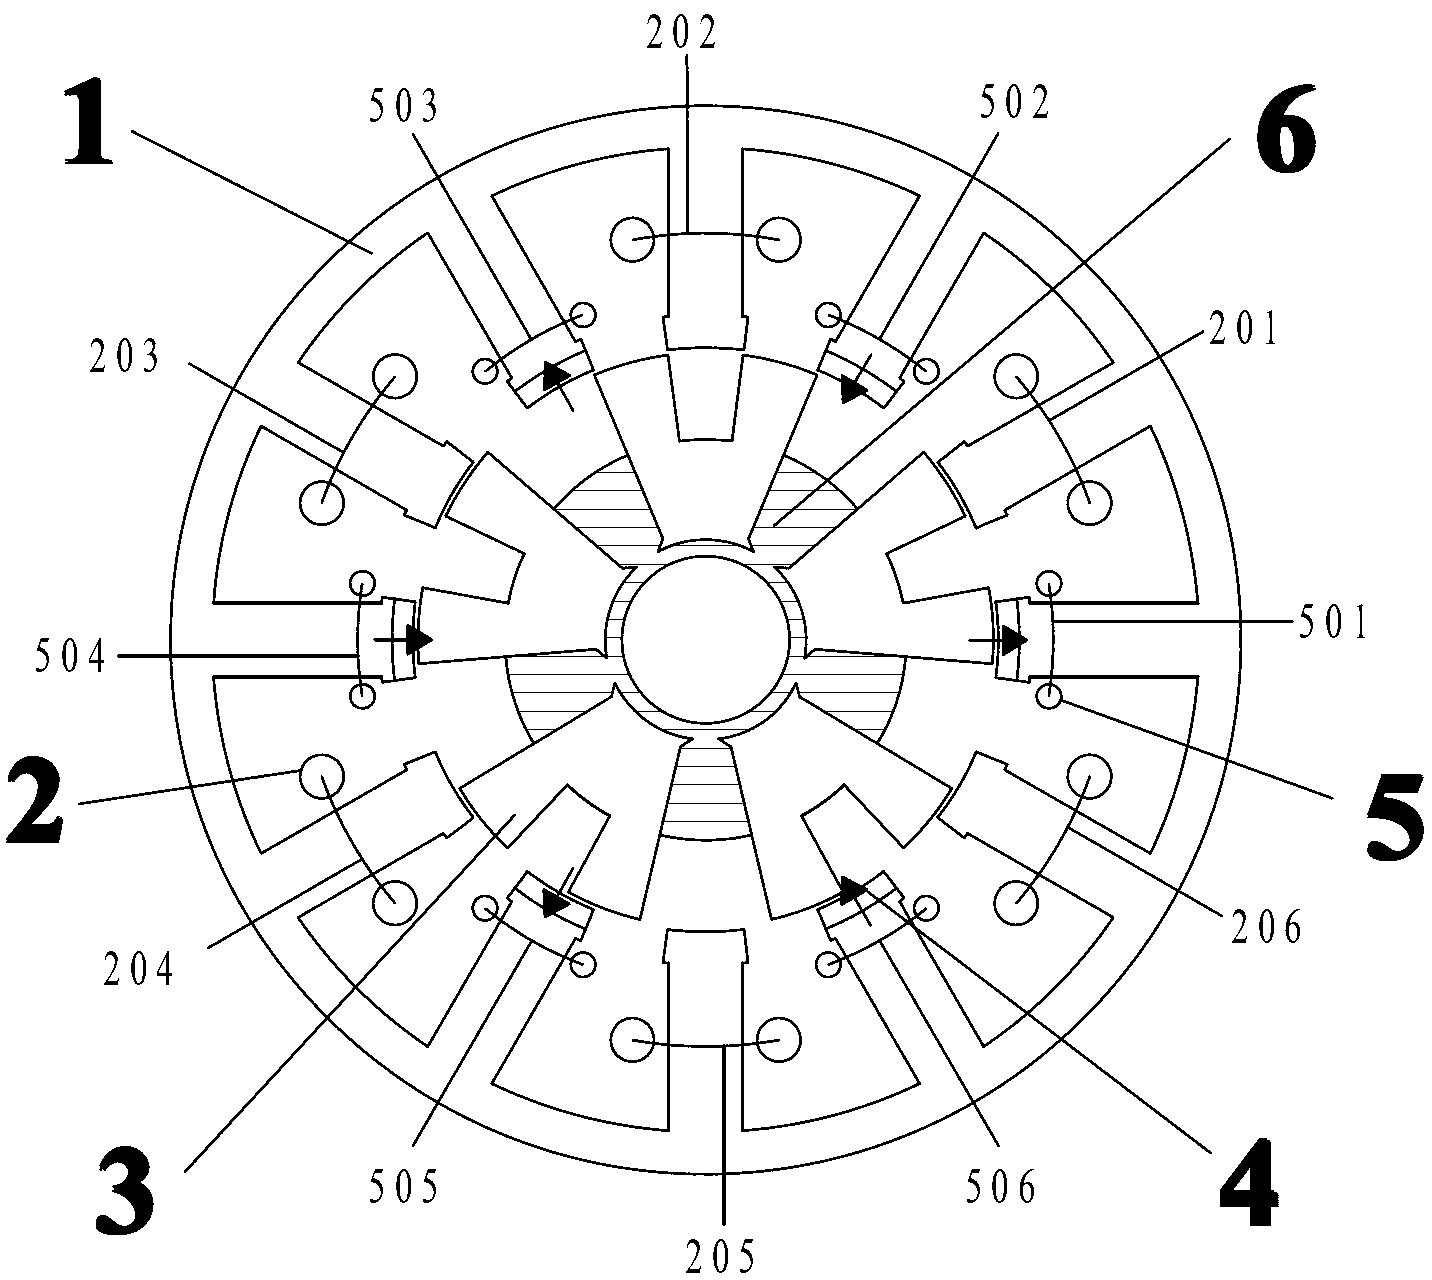 Mixed excitation stator surface-mounted double-salient motor